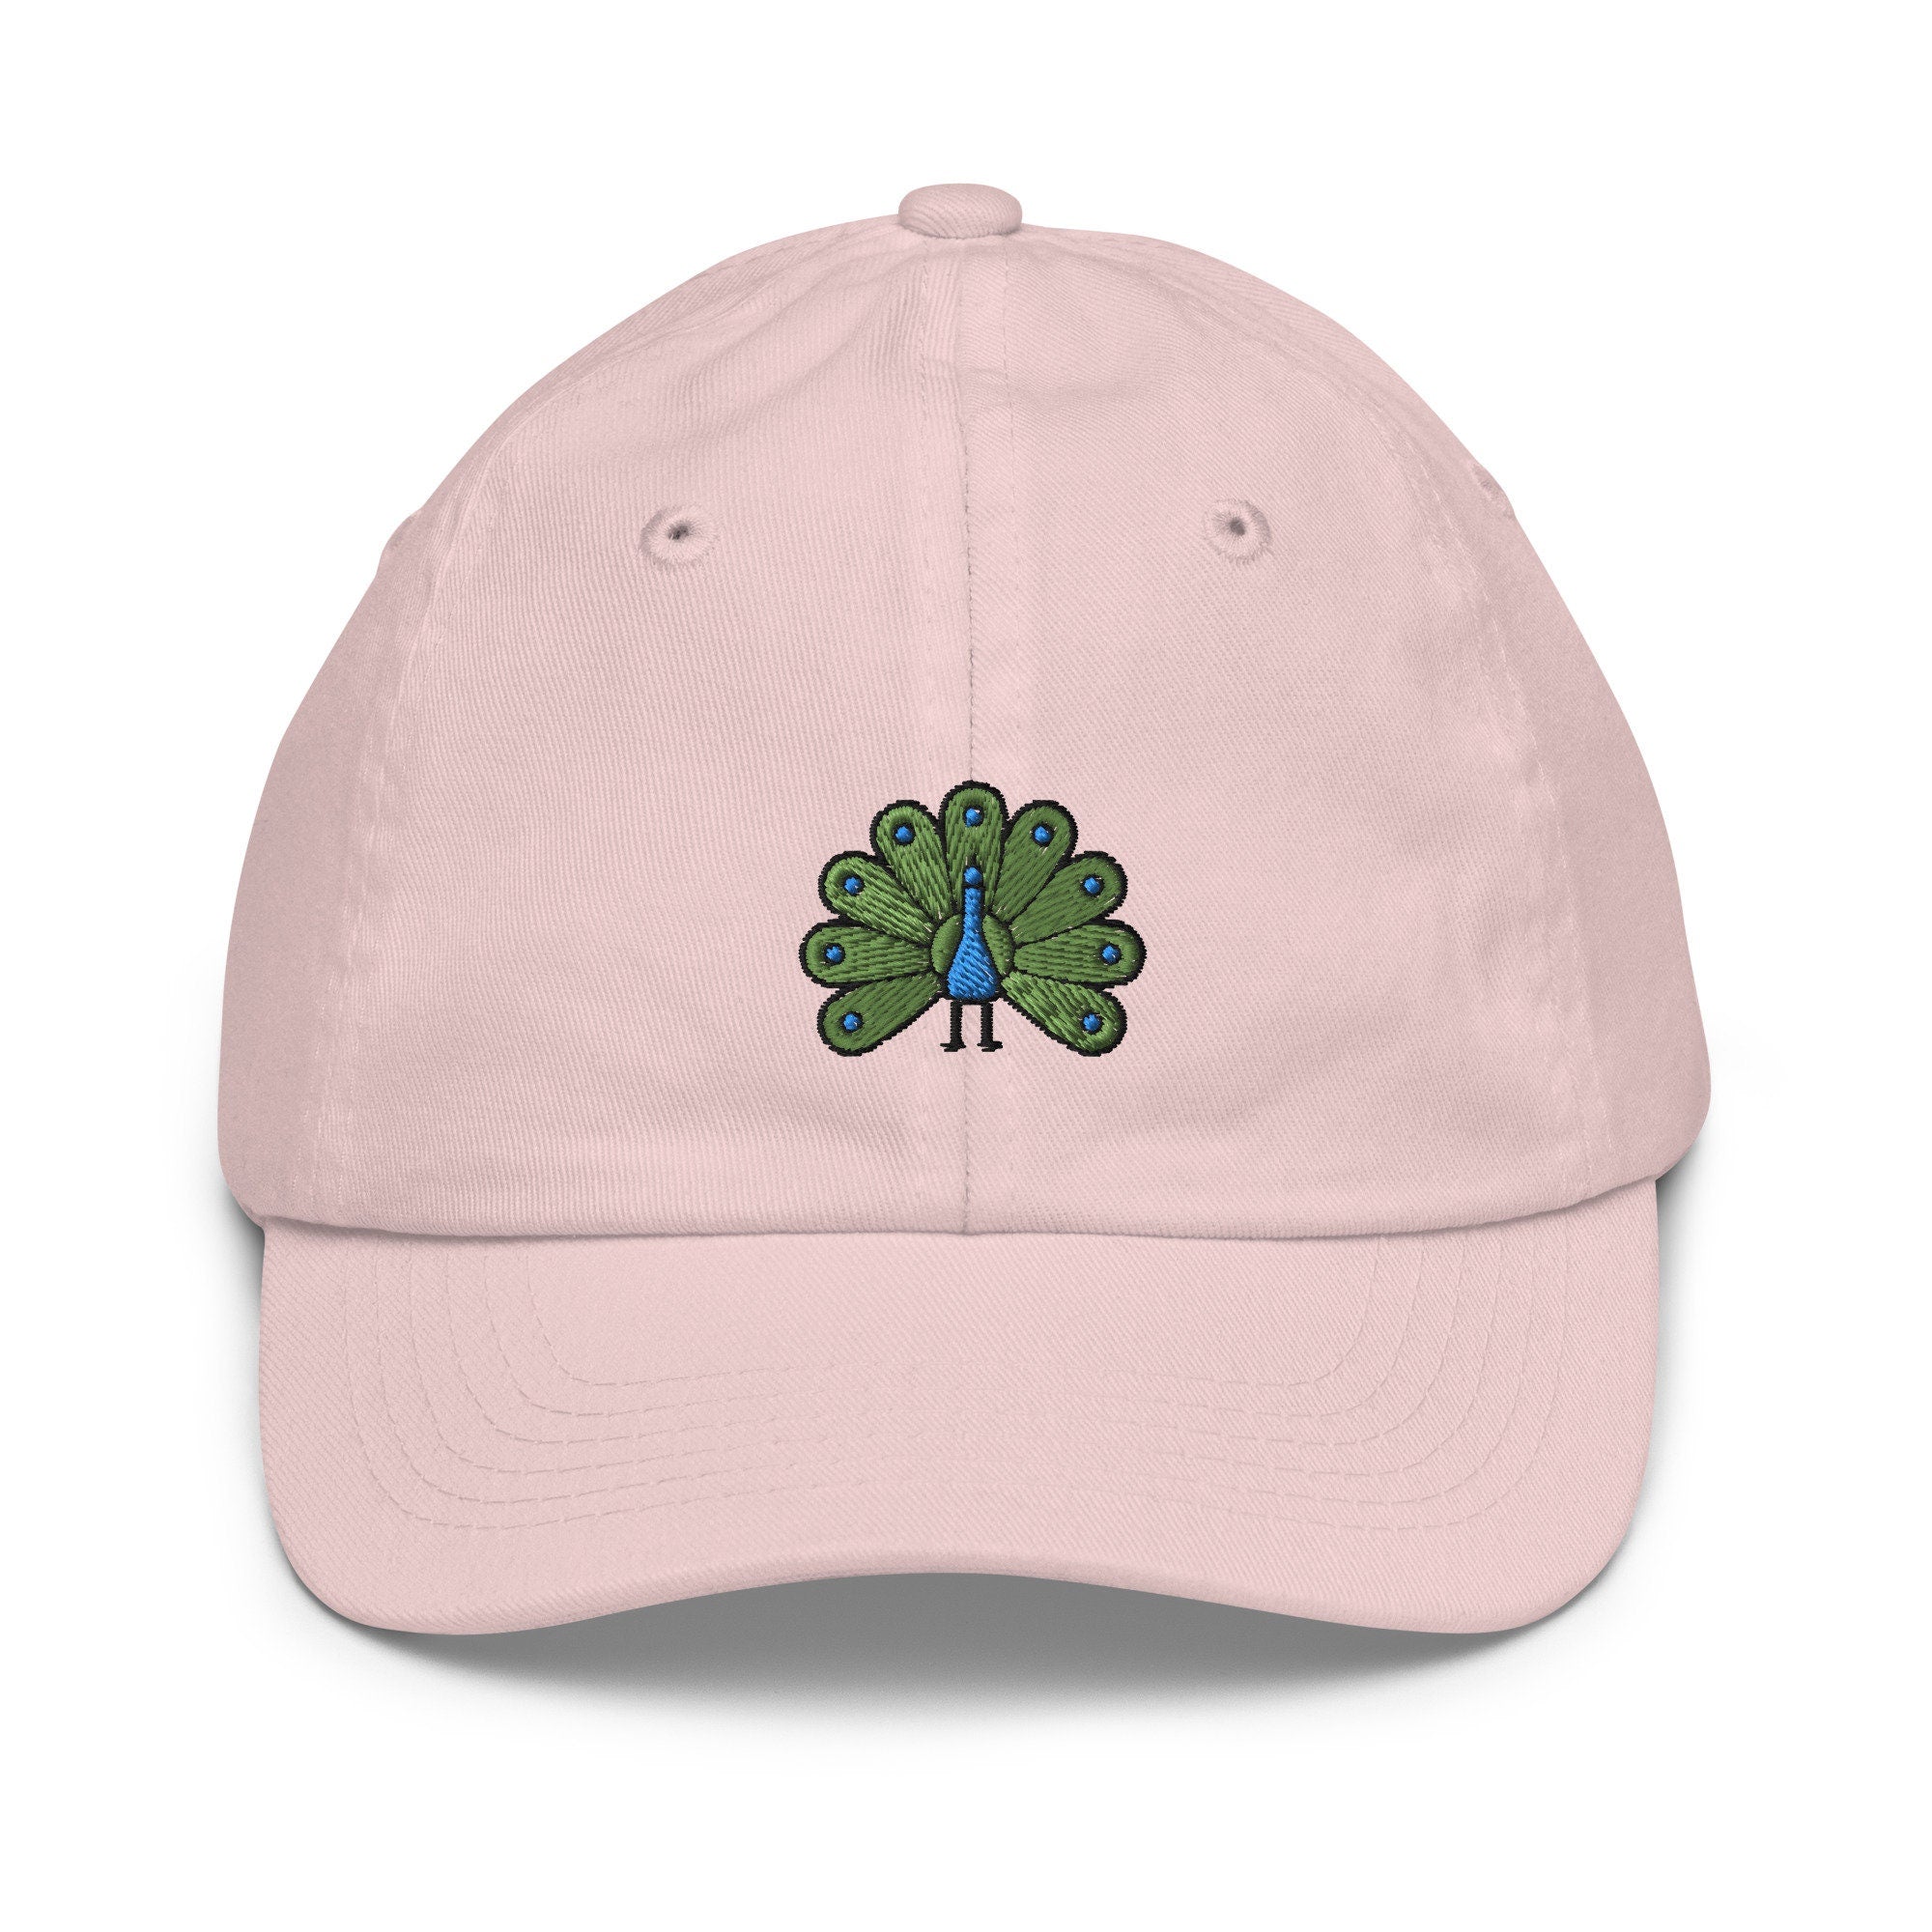 Peacock Youth Baseball Cap, Handmade Kids Hat, Embroidered Childrens Hat Gift - Multiple Colors